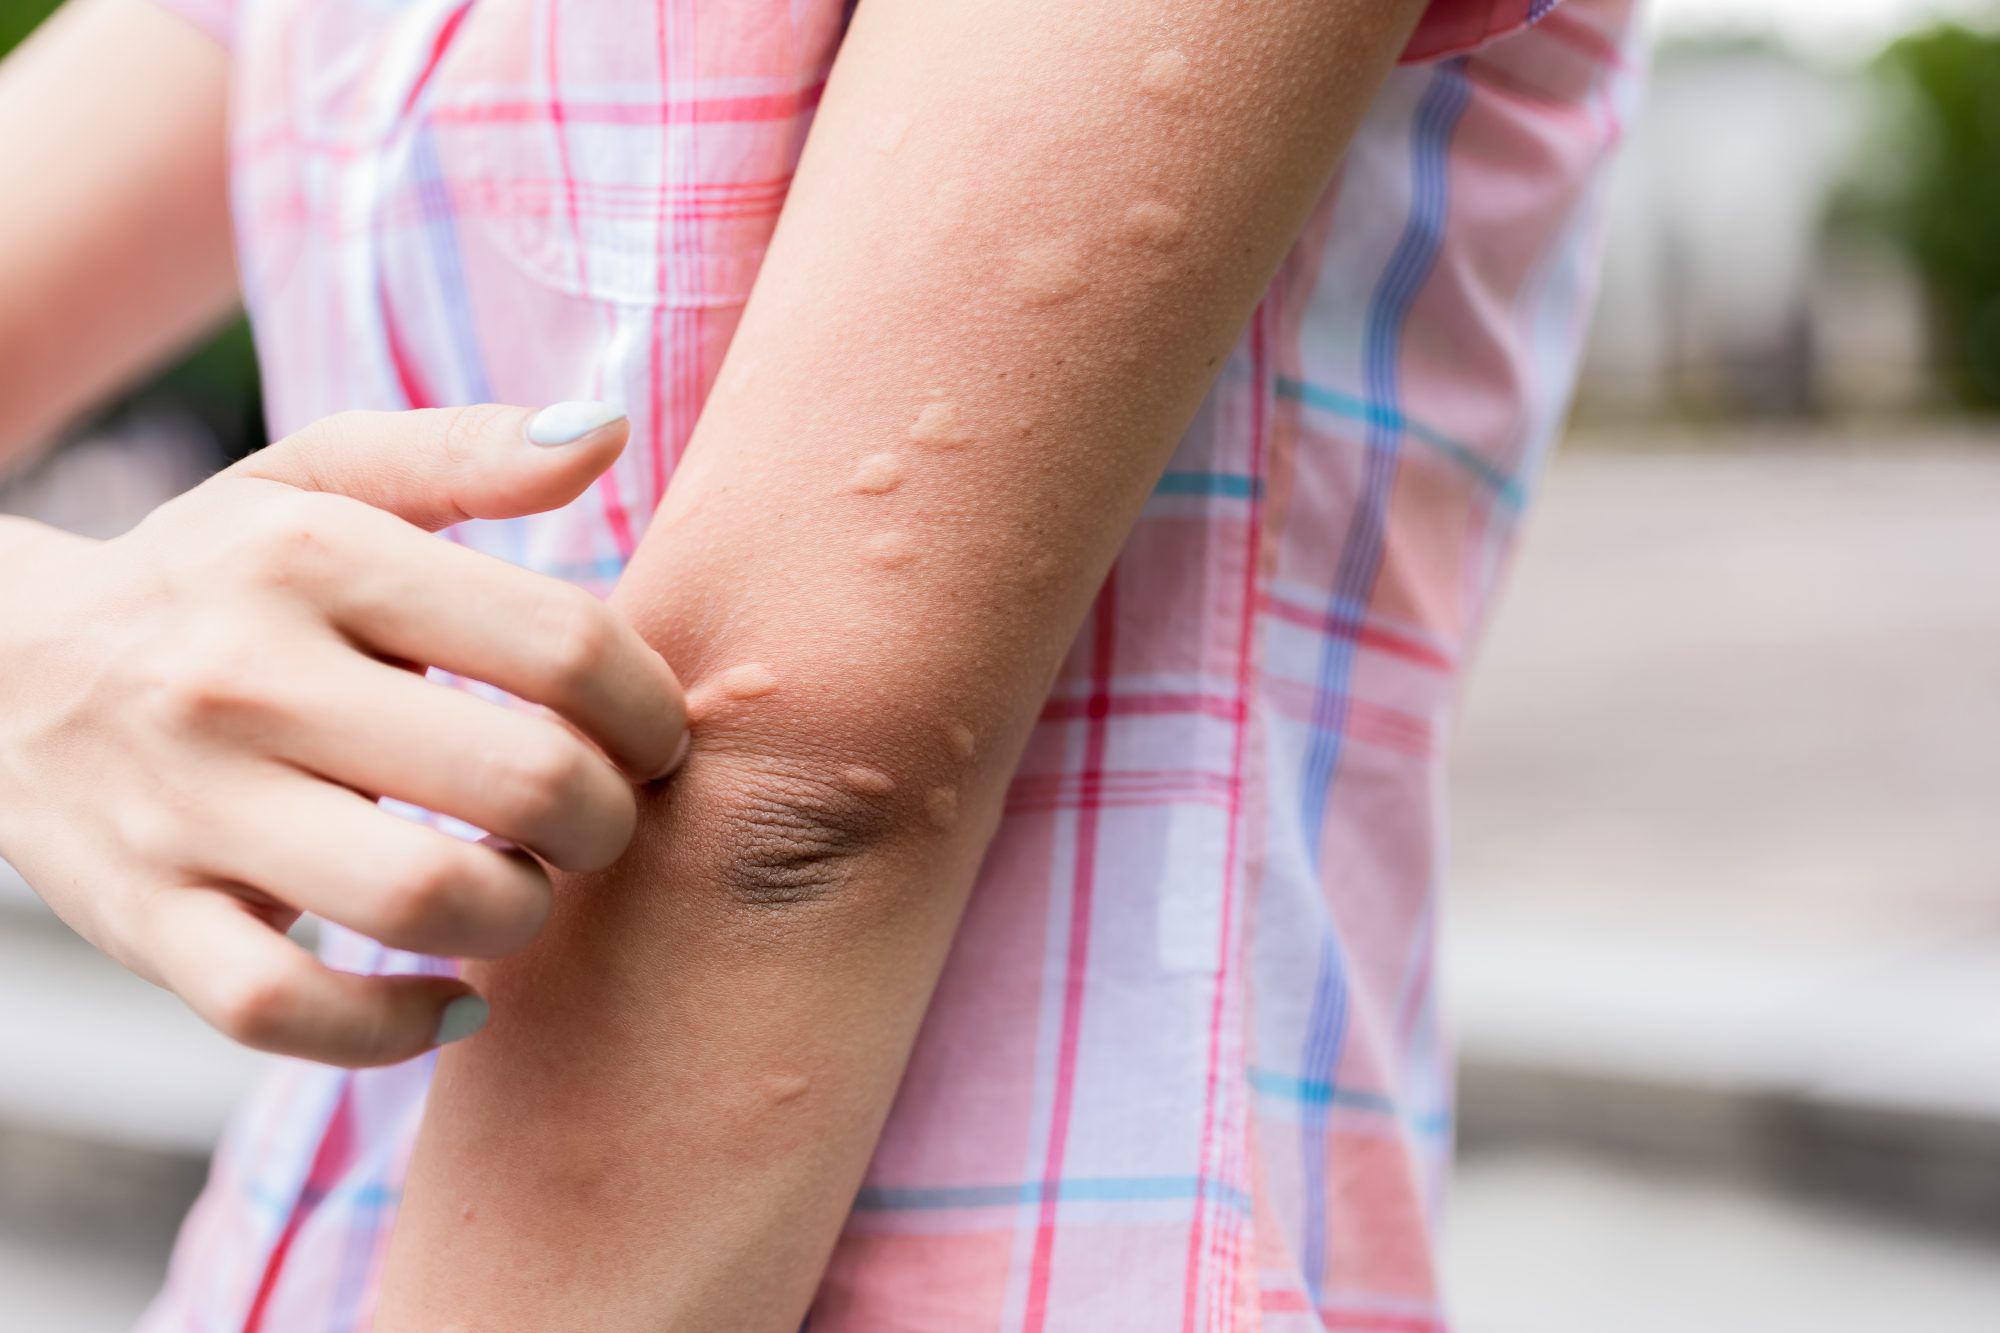 What Does an Allergic Reaction Heat Rash Look Like?